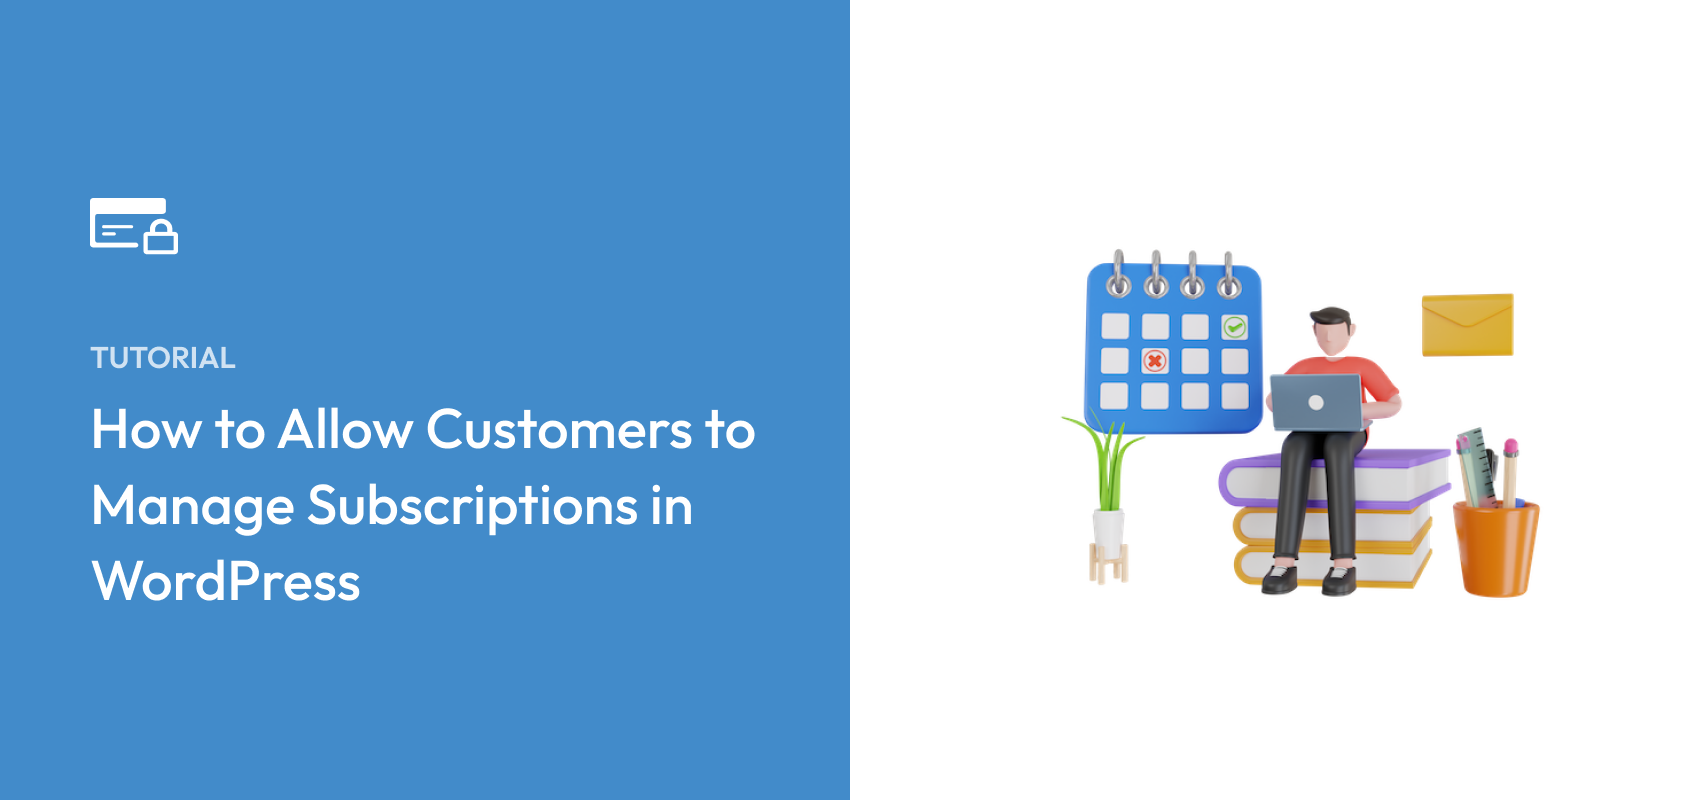 How to Allow Customers to Manage Subscriptions in WordPress